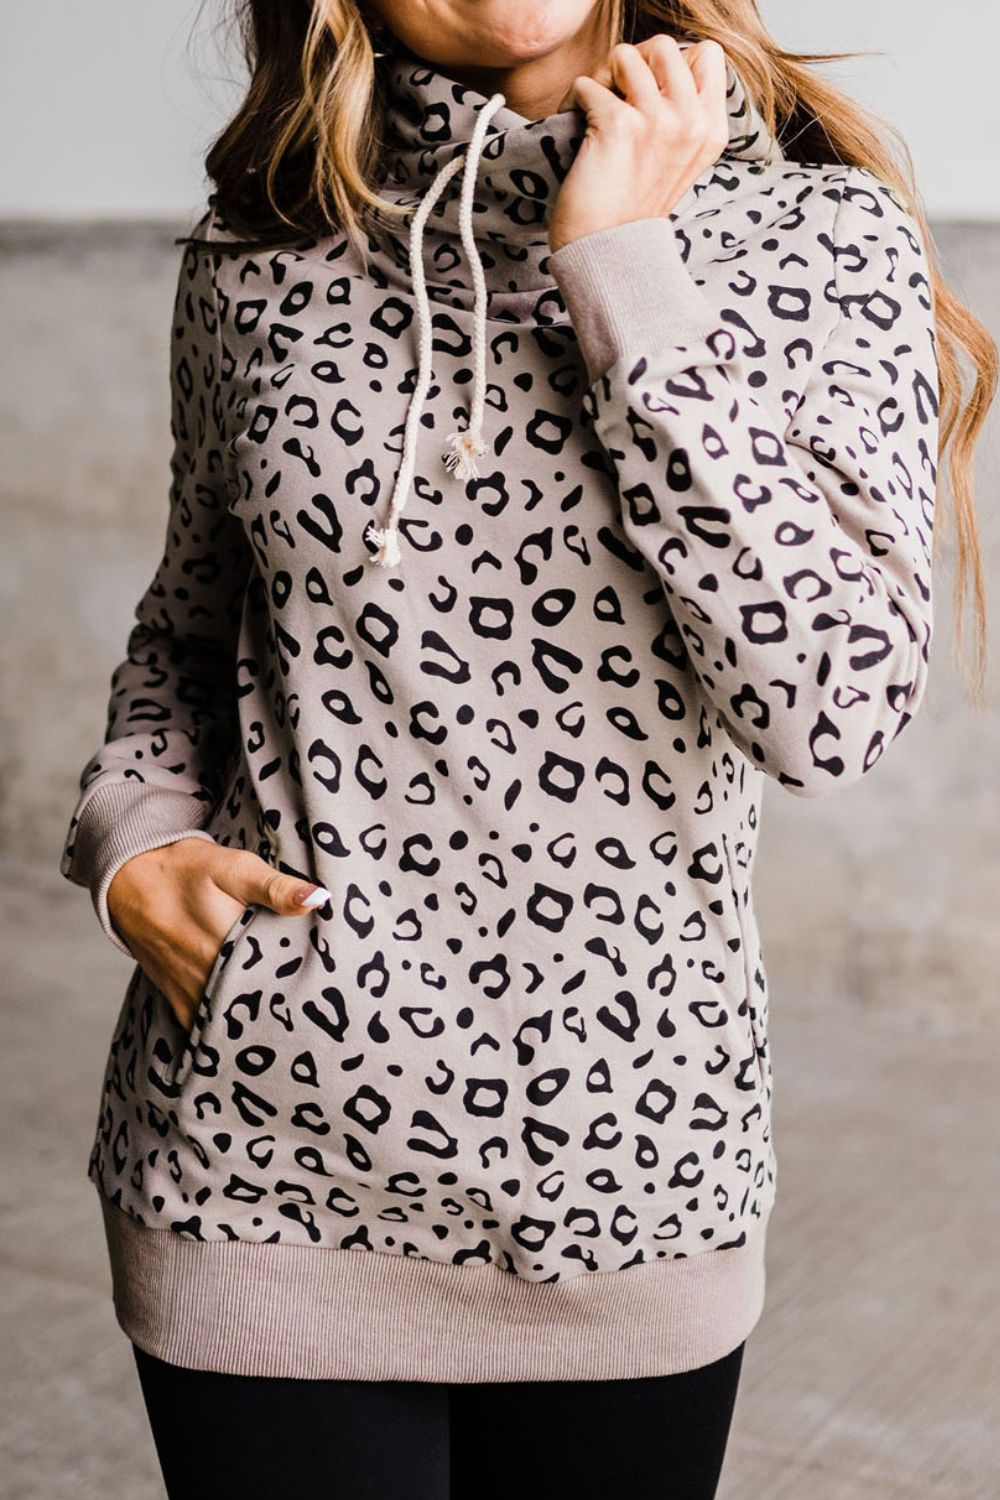 Leopard Print Long Sleeve Hoodie - Women’s Clothing & Accessories - Shirts & Tops - 3 - 2024